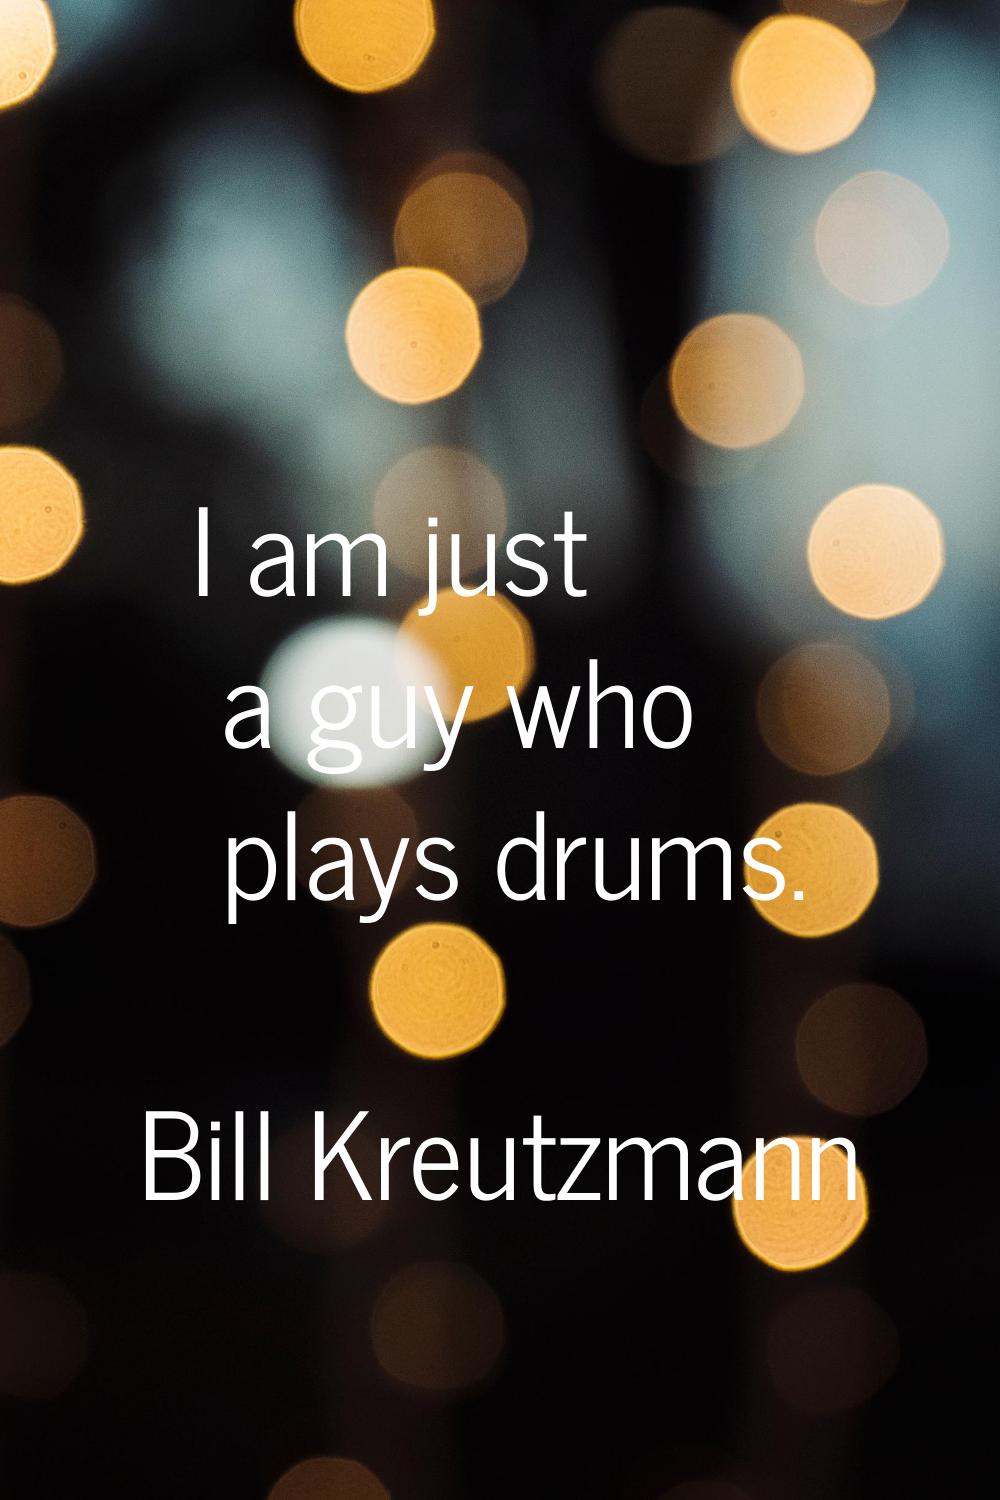 I am just a guy who plays drums.